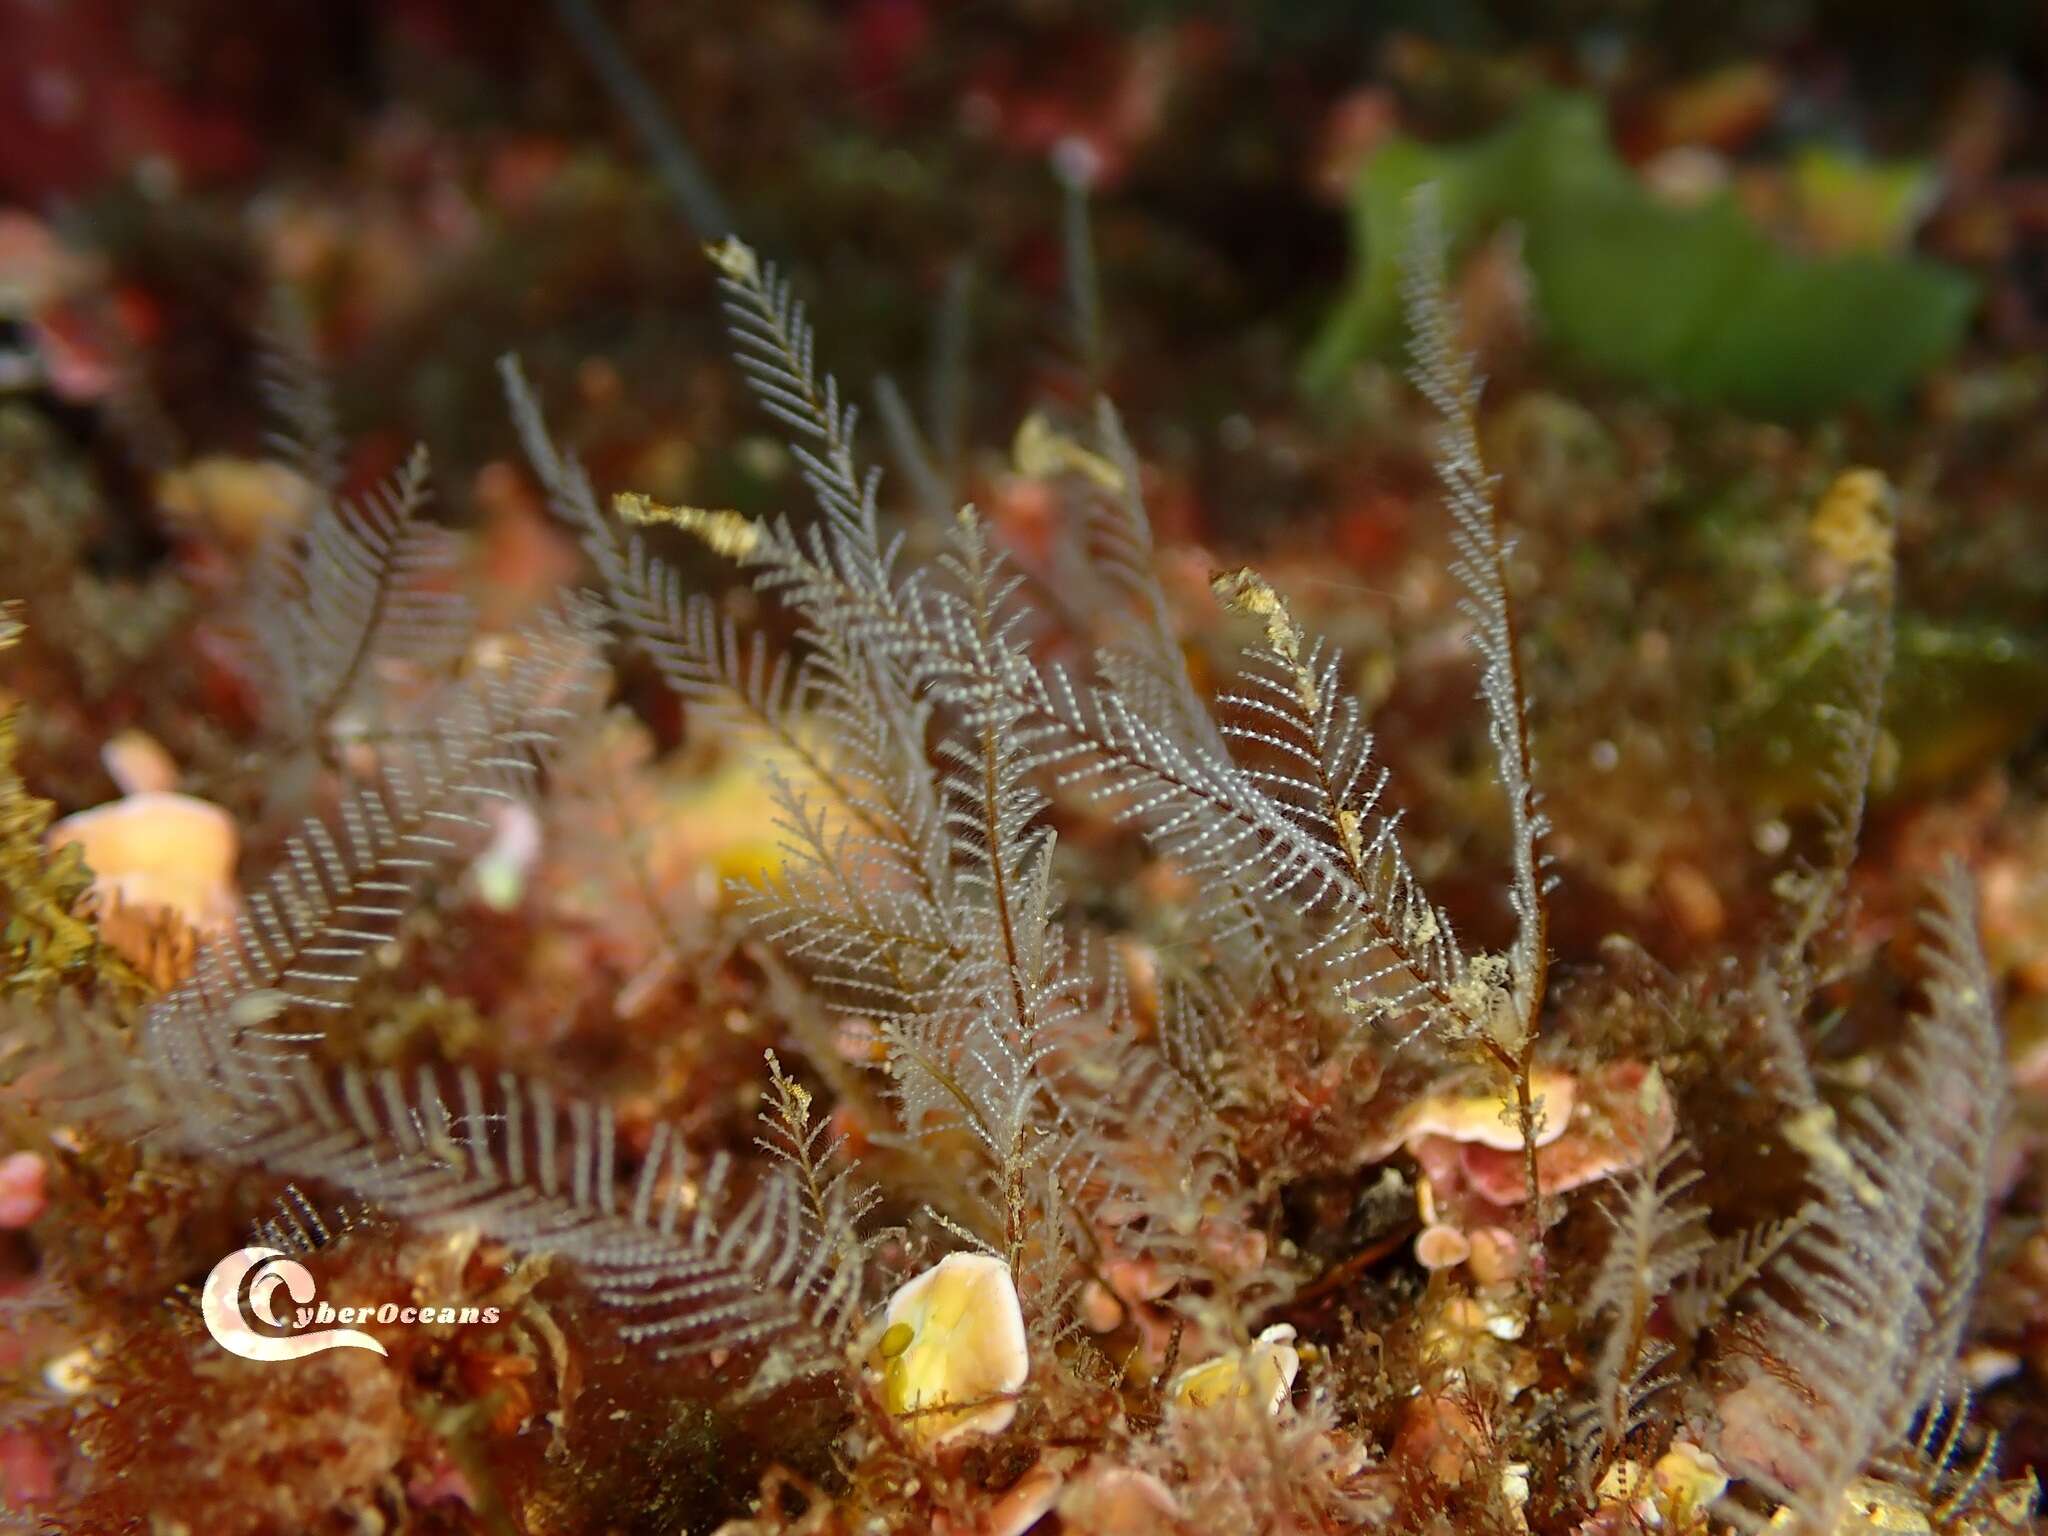 Image of podded hydroid